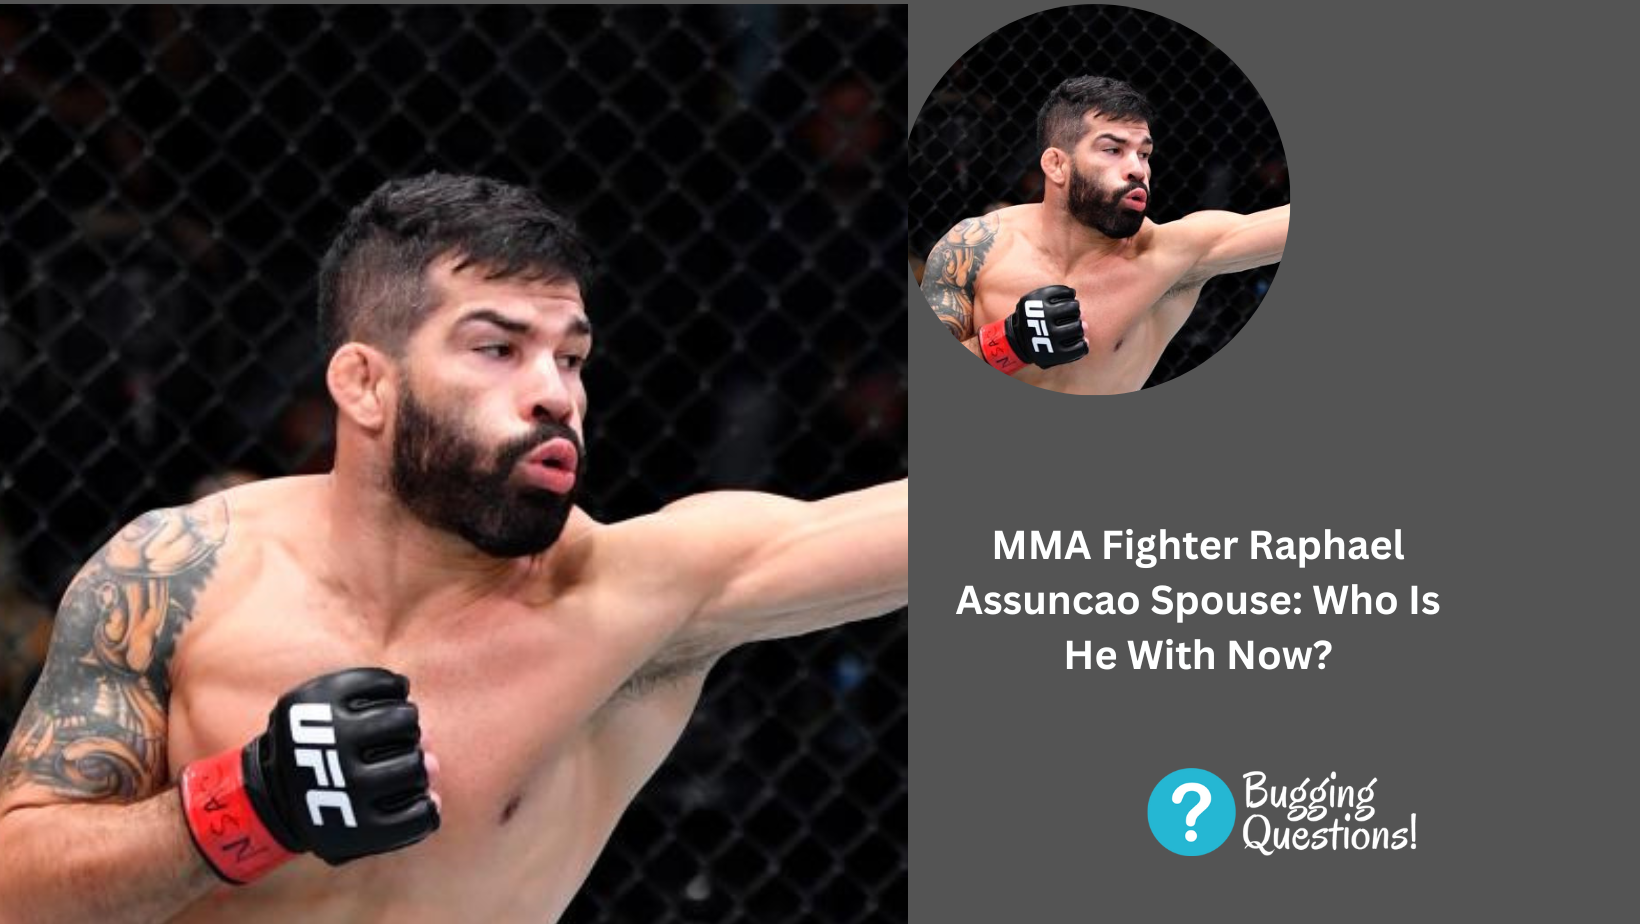 MMA Fighter Raphael Assuncao Spouse: Who Is He With Now?